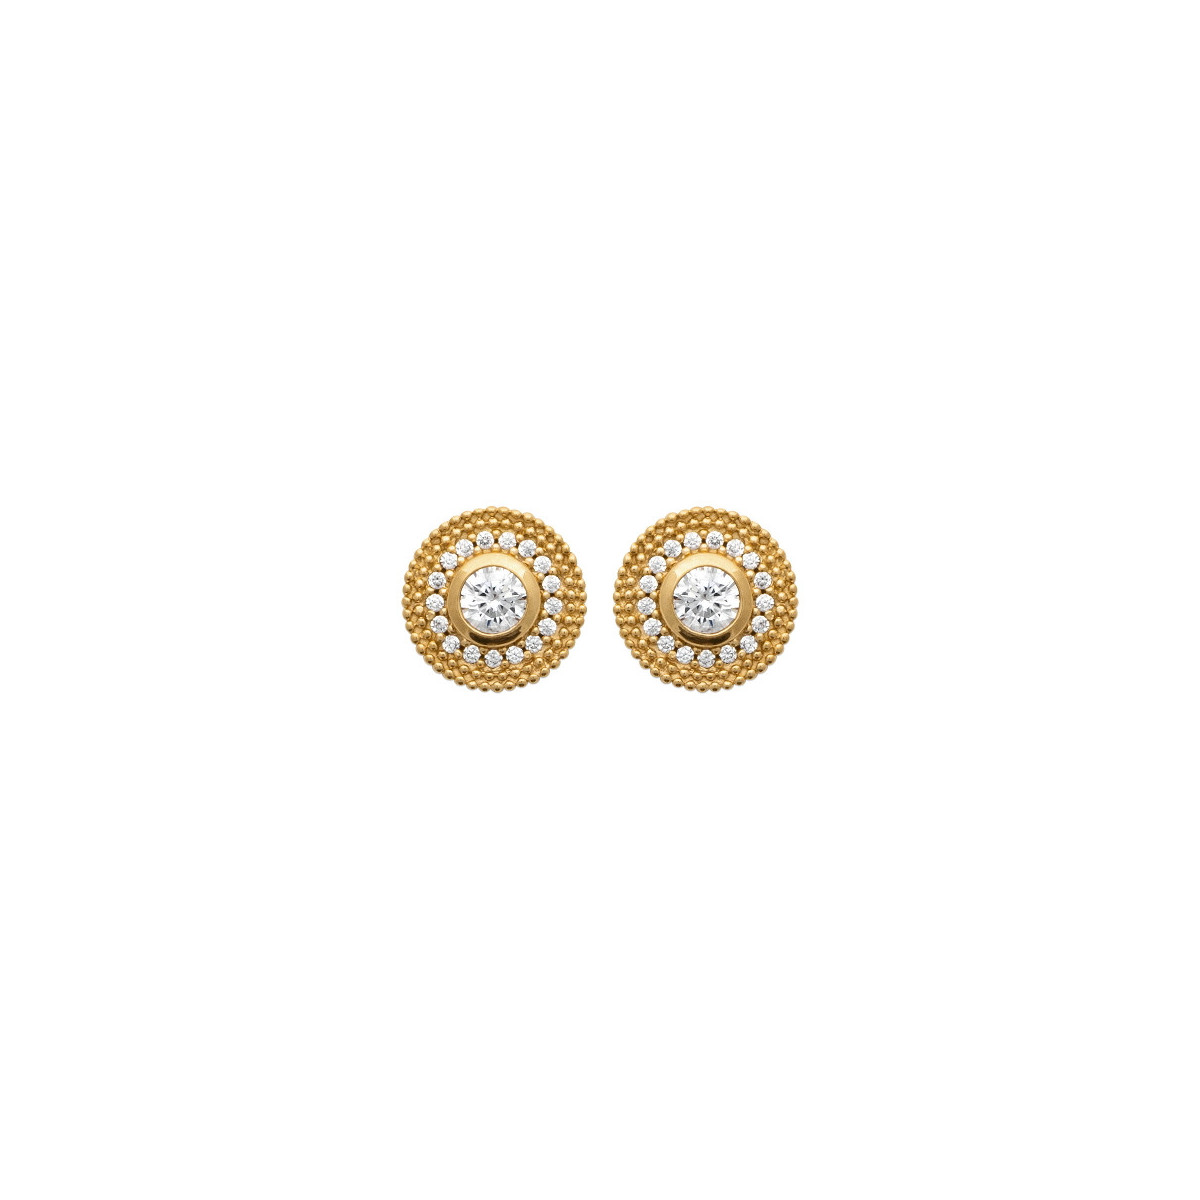 BUTTON EARRINGS WITH ZIRCONIA